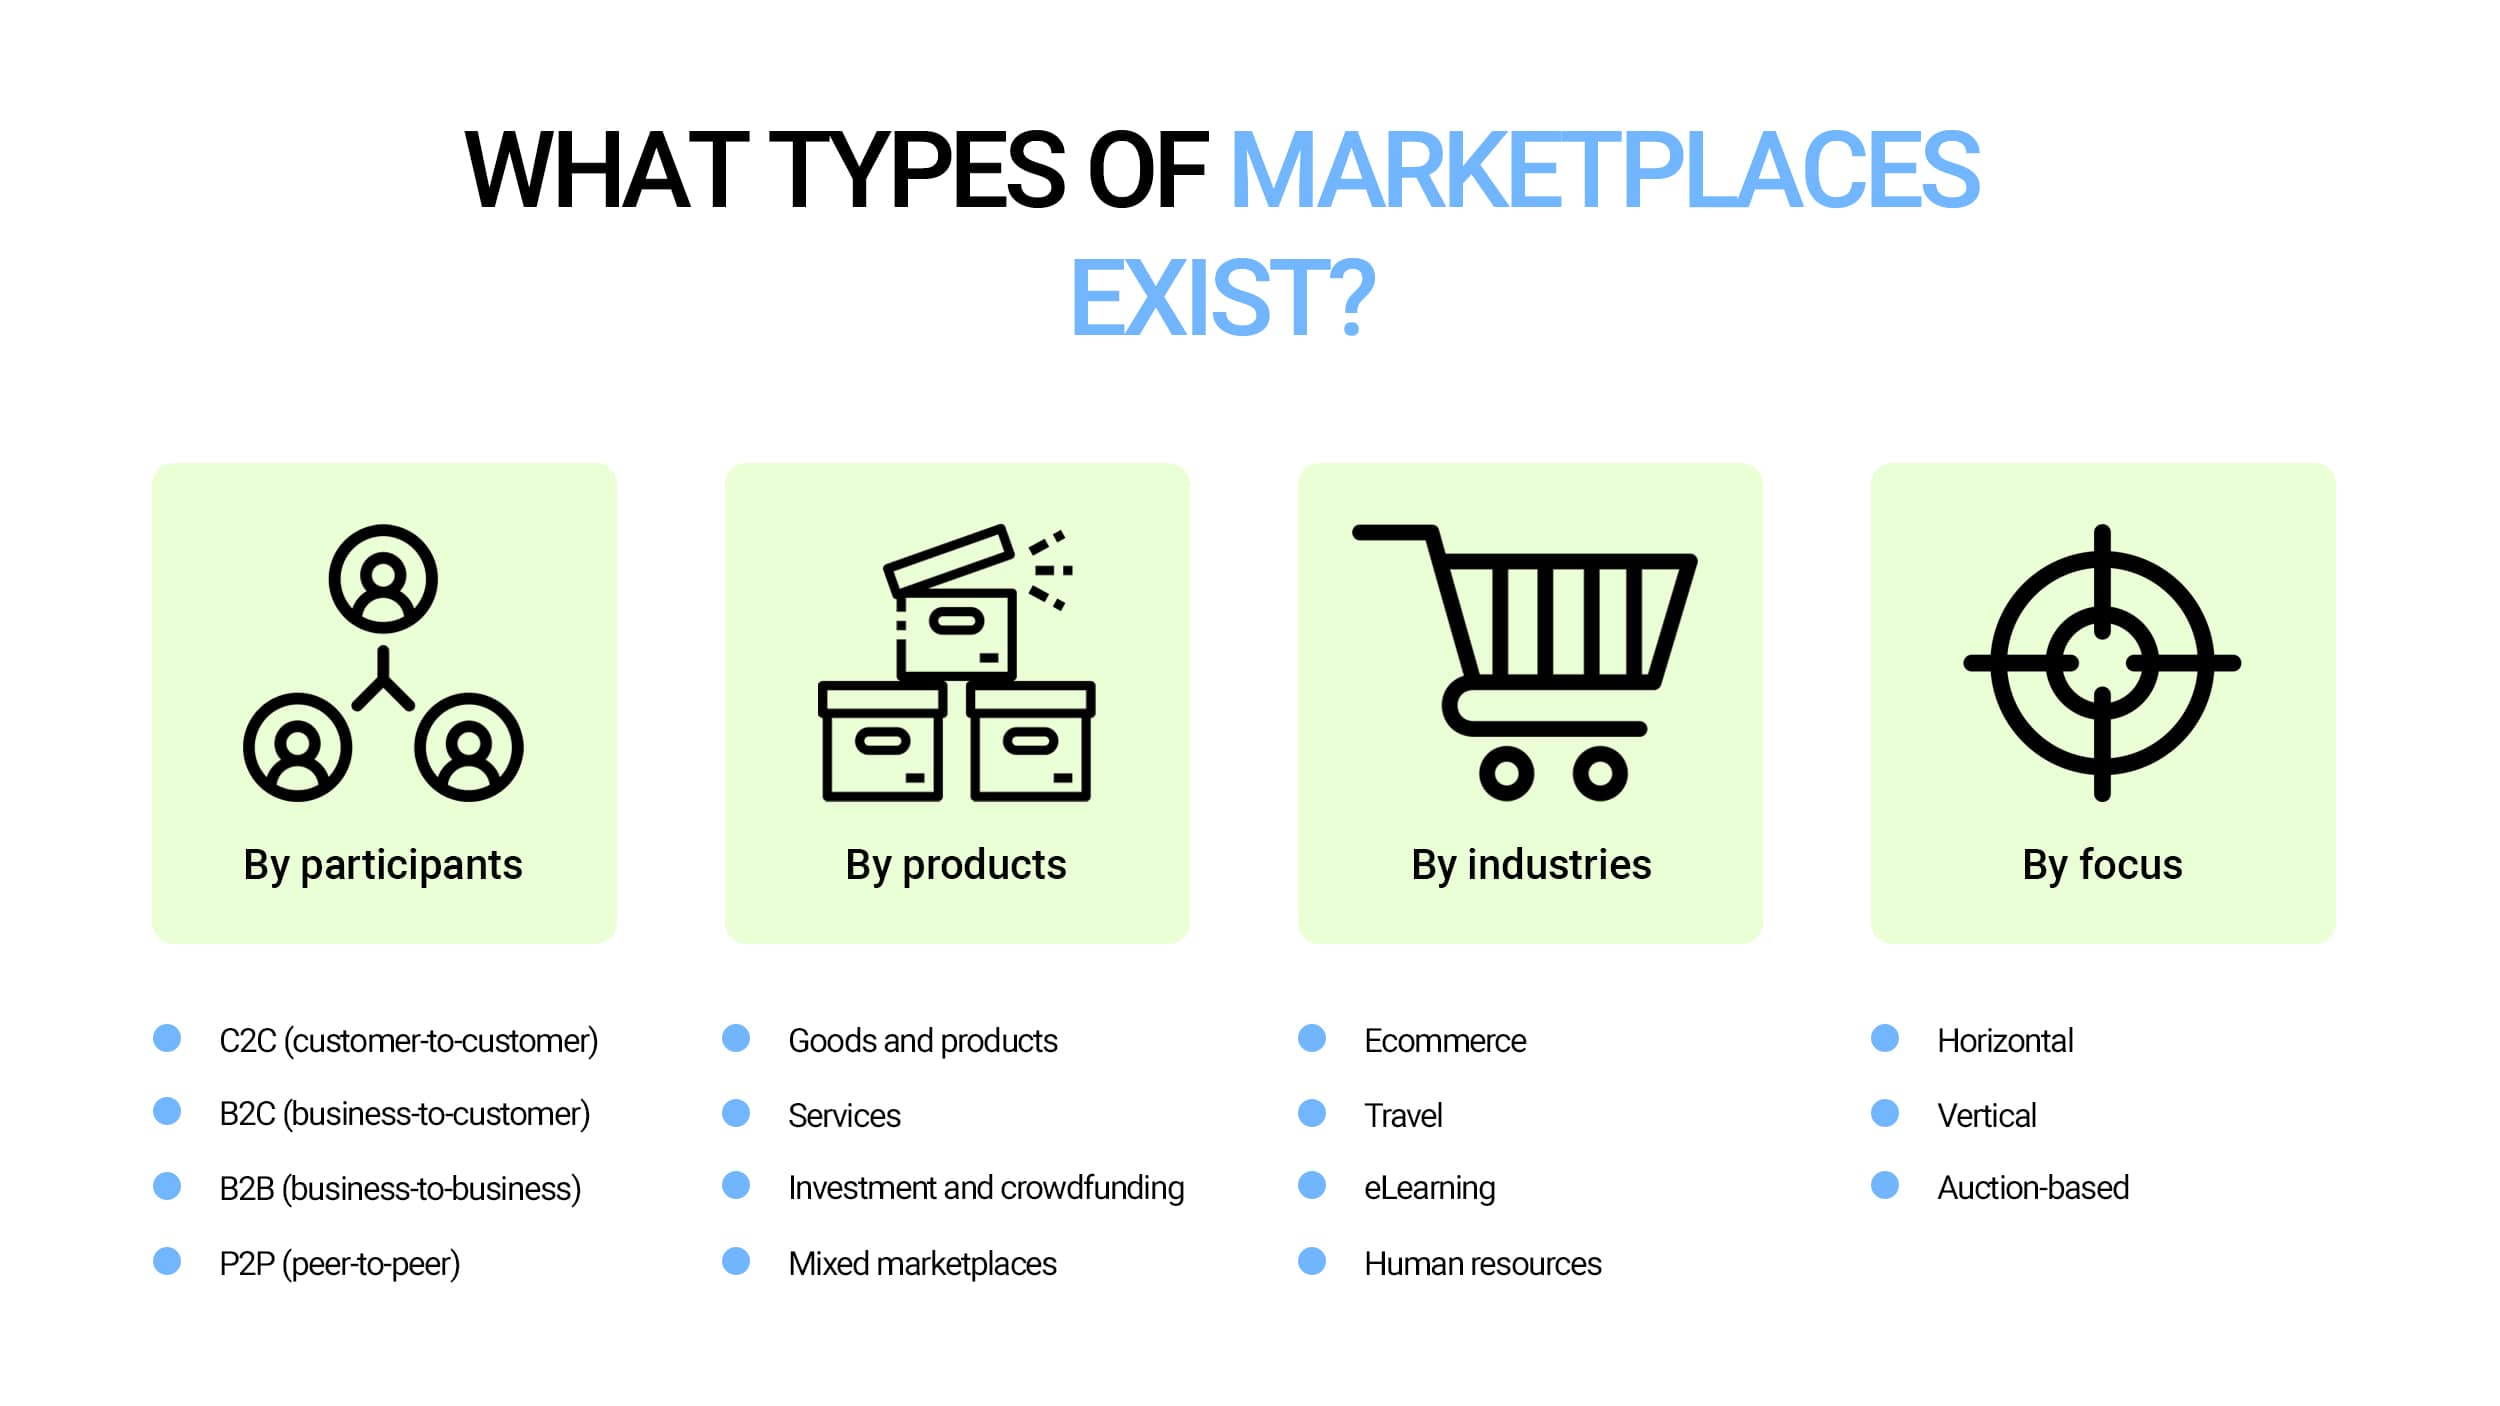 Types of marketplaces